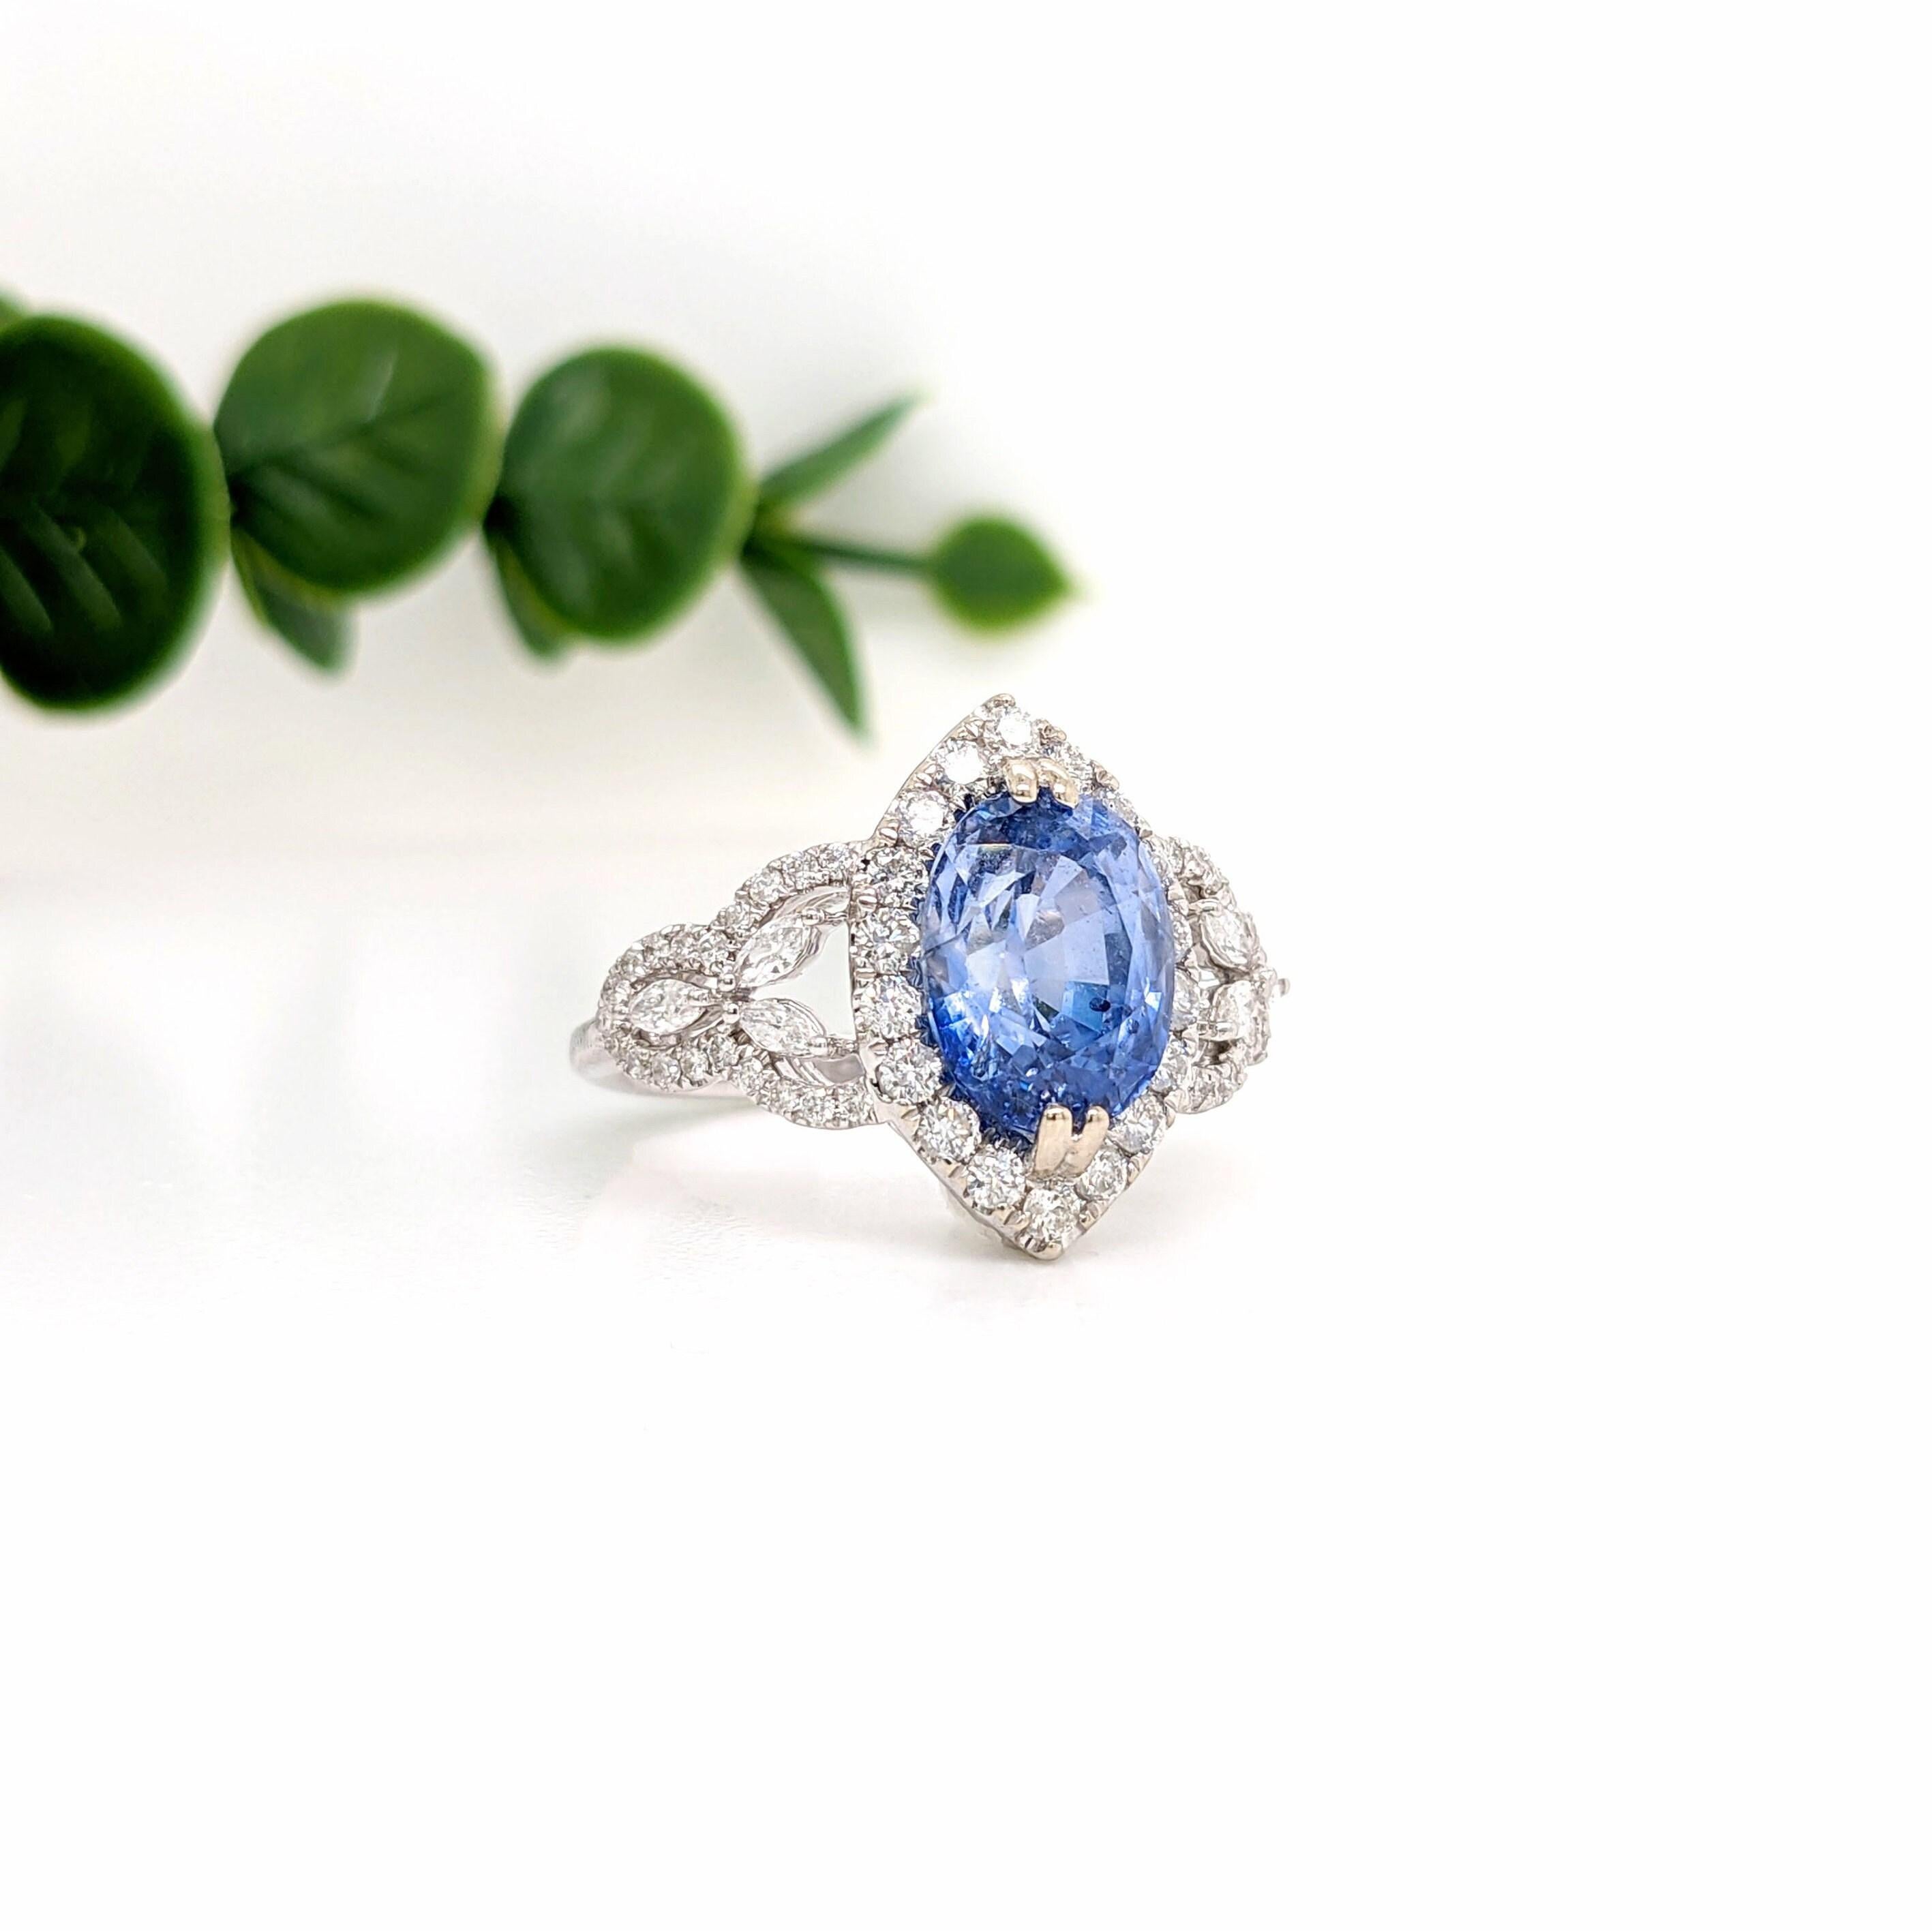 This stunning statement ring features a sparkling Ceylon Sapphire in 14k white gold with a diamond halo and fancy diamond accent shank . A art deco ring design perfect for an eye catching engagement or anniversary. This ring also makes a beautiful